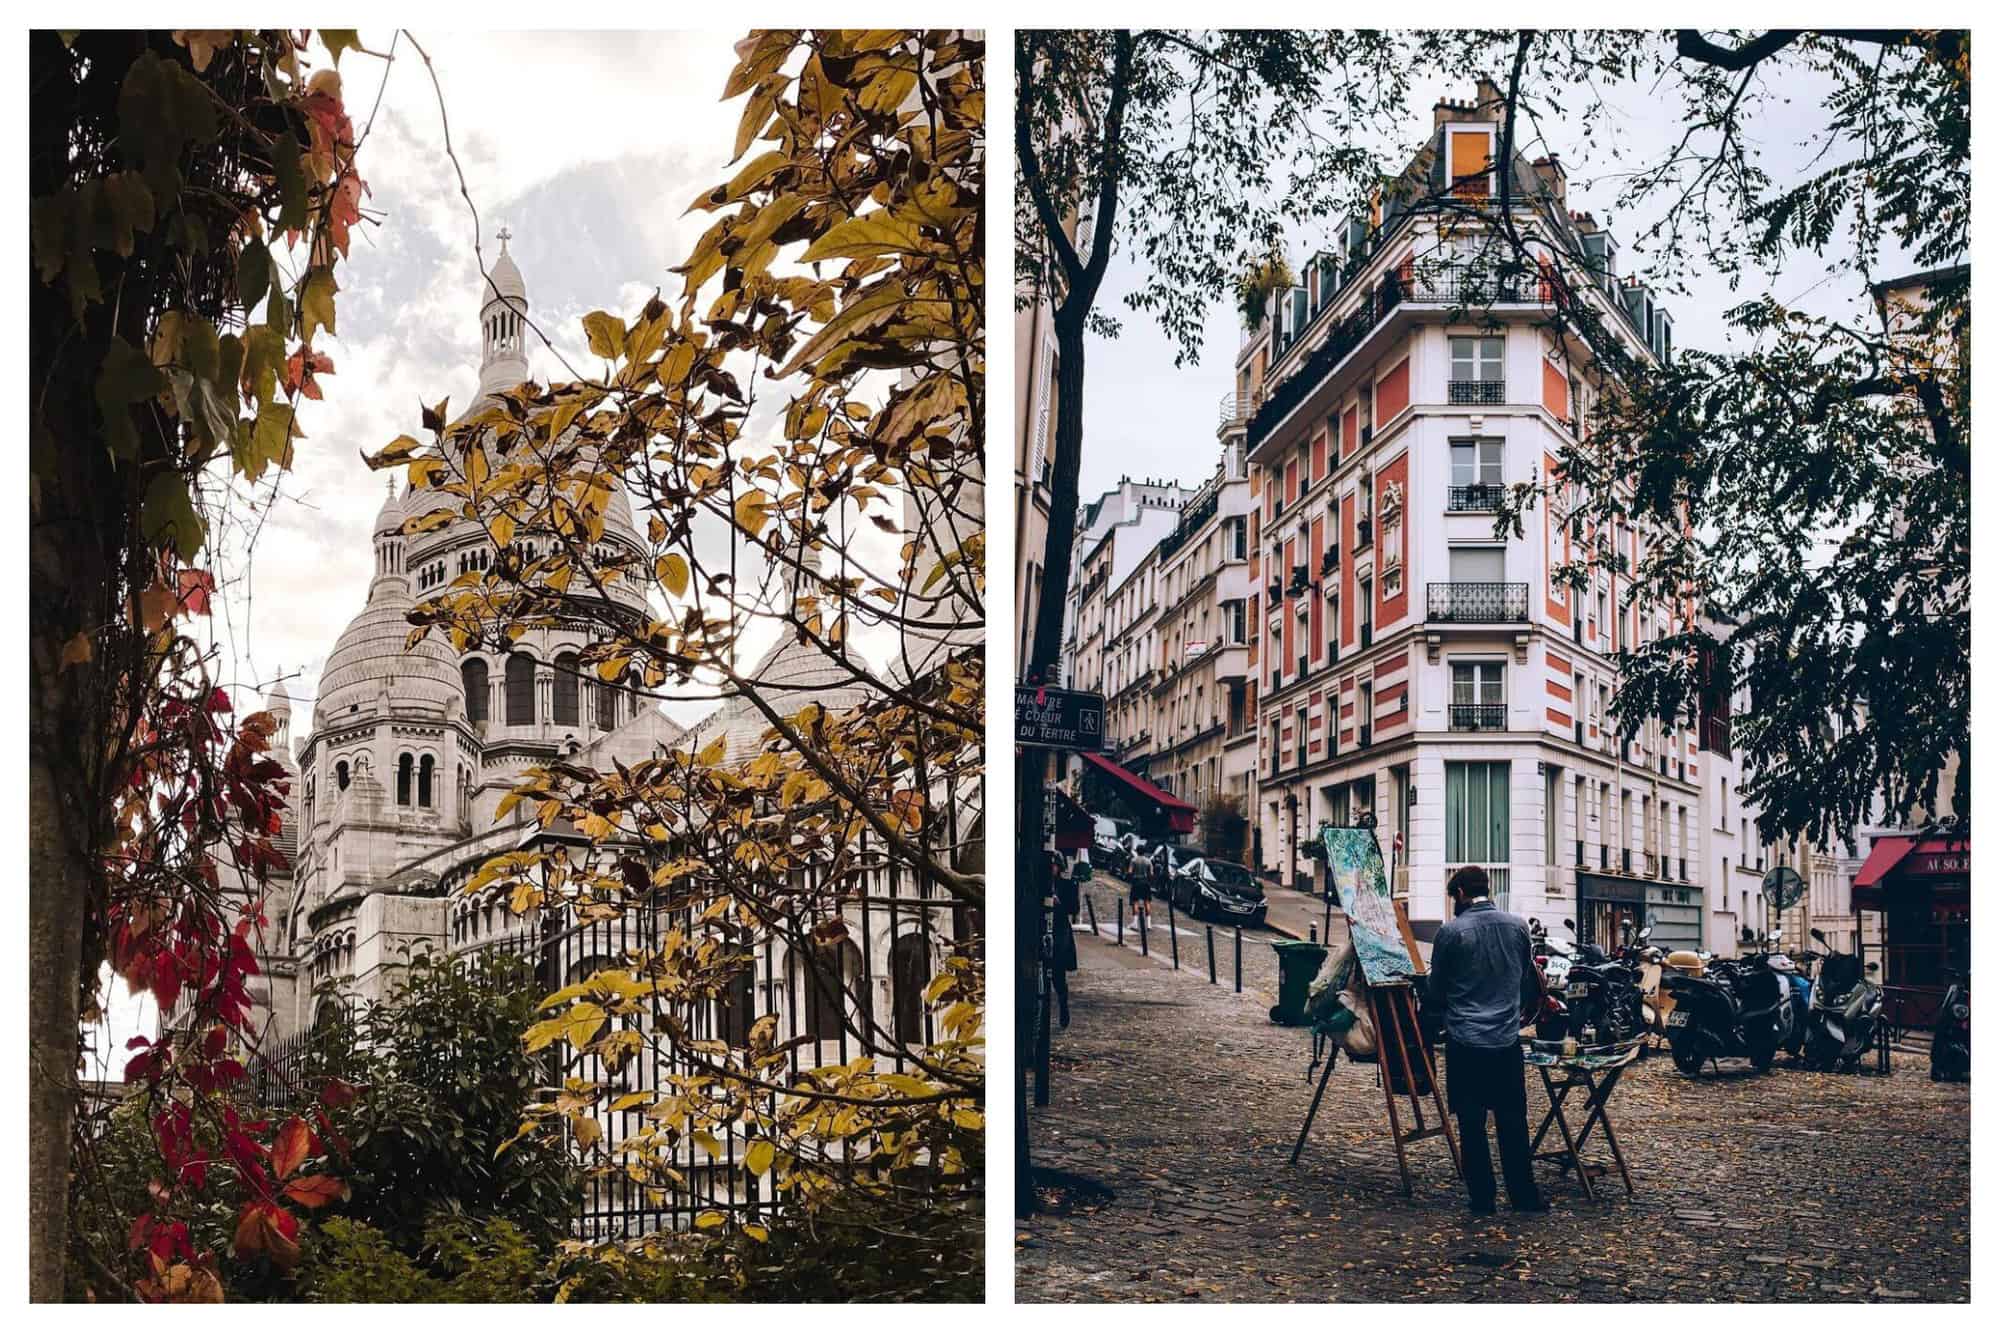 Left: a view of the Sacre Coeur in Paris through surrounding trees. There are trees' leaves surrounding the frame of the picture. The leaves to the left are red and orange and the leaves to the right are yellow and green. Left: a street in Montmartre in Paris. In the center of the photo, a man is painting on an easel on the sidewalk. There are trees' leaves framing the photo on top, and there are fallen leaves on the ground surrounding the man.